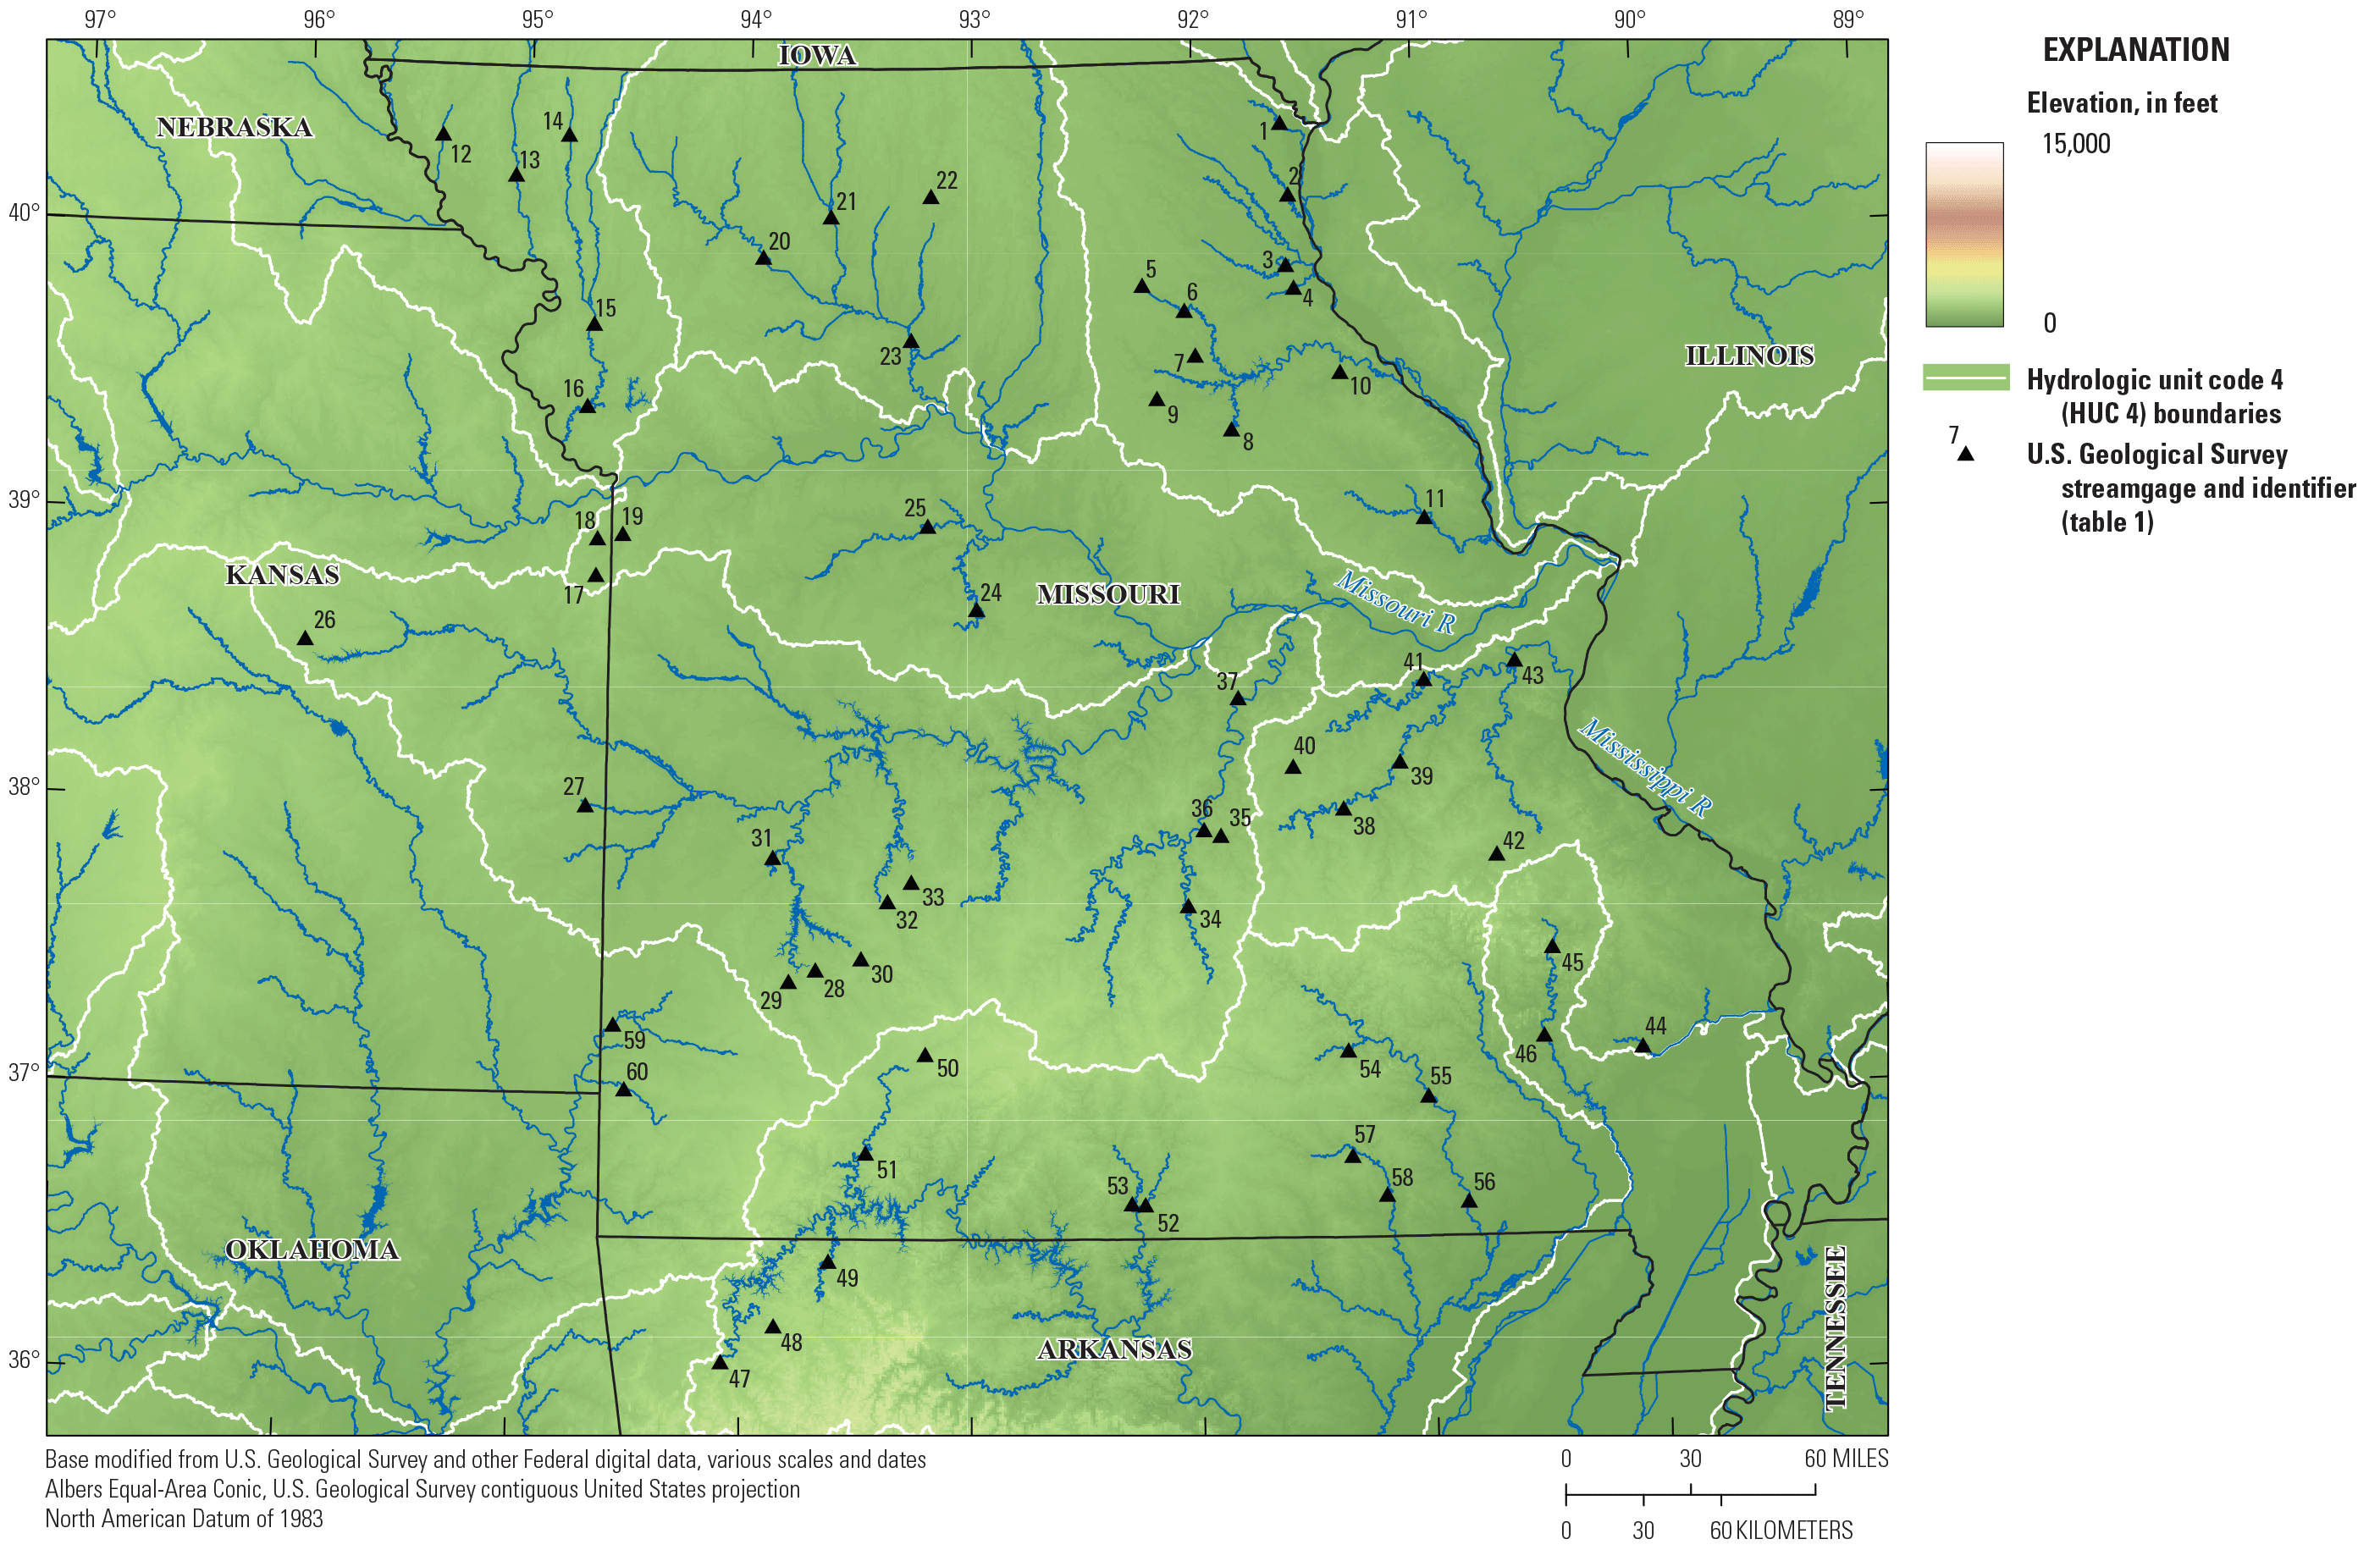 Elevation, major rivers, and U.S. Geological Survey streamgages in Missouri.